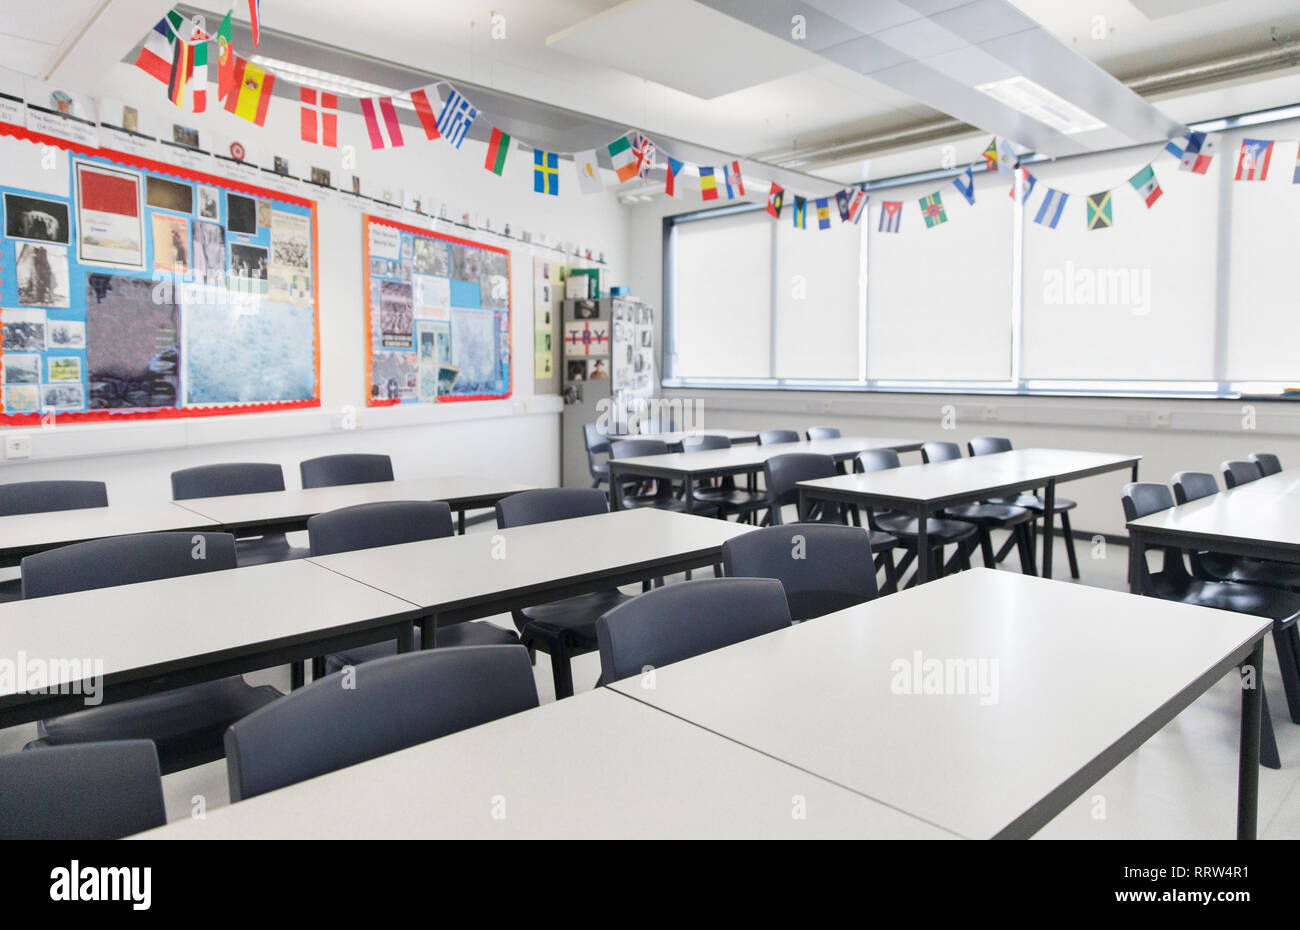 International flags hanging over desks in classroom Stock Photo